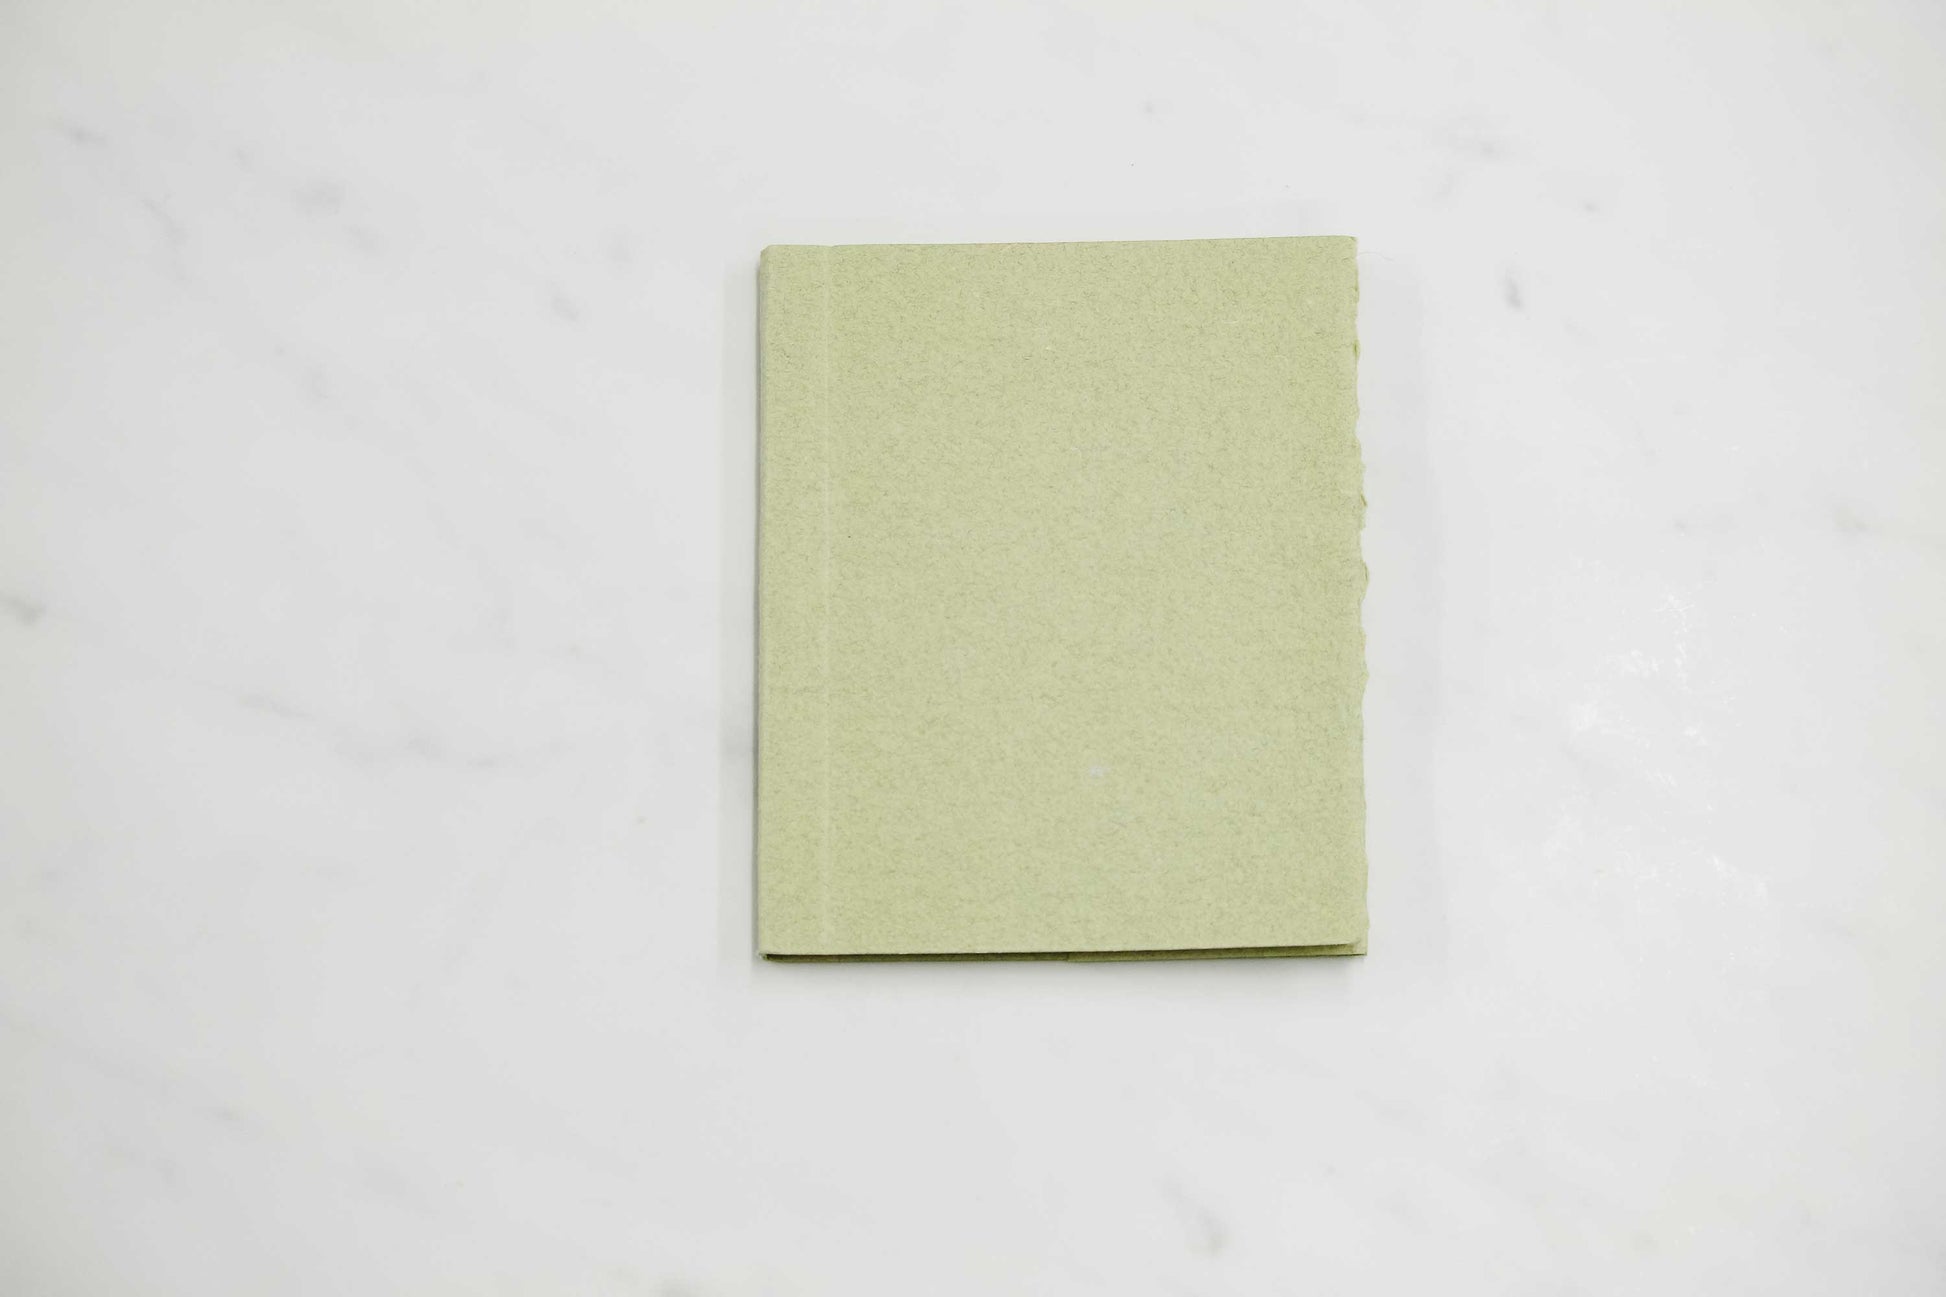 Mini 5 1/4-inch by 4 1/4-inch handmade Papeterie St. Armand cotton paper notepad with pale green cover